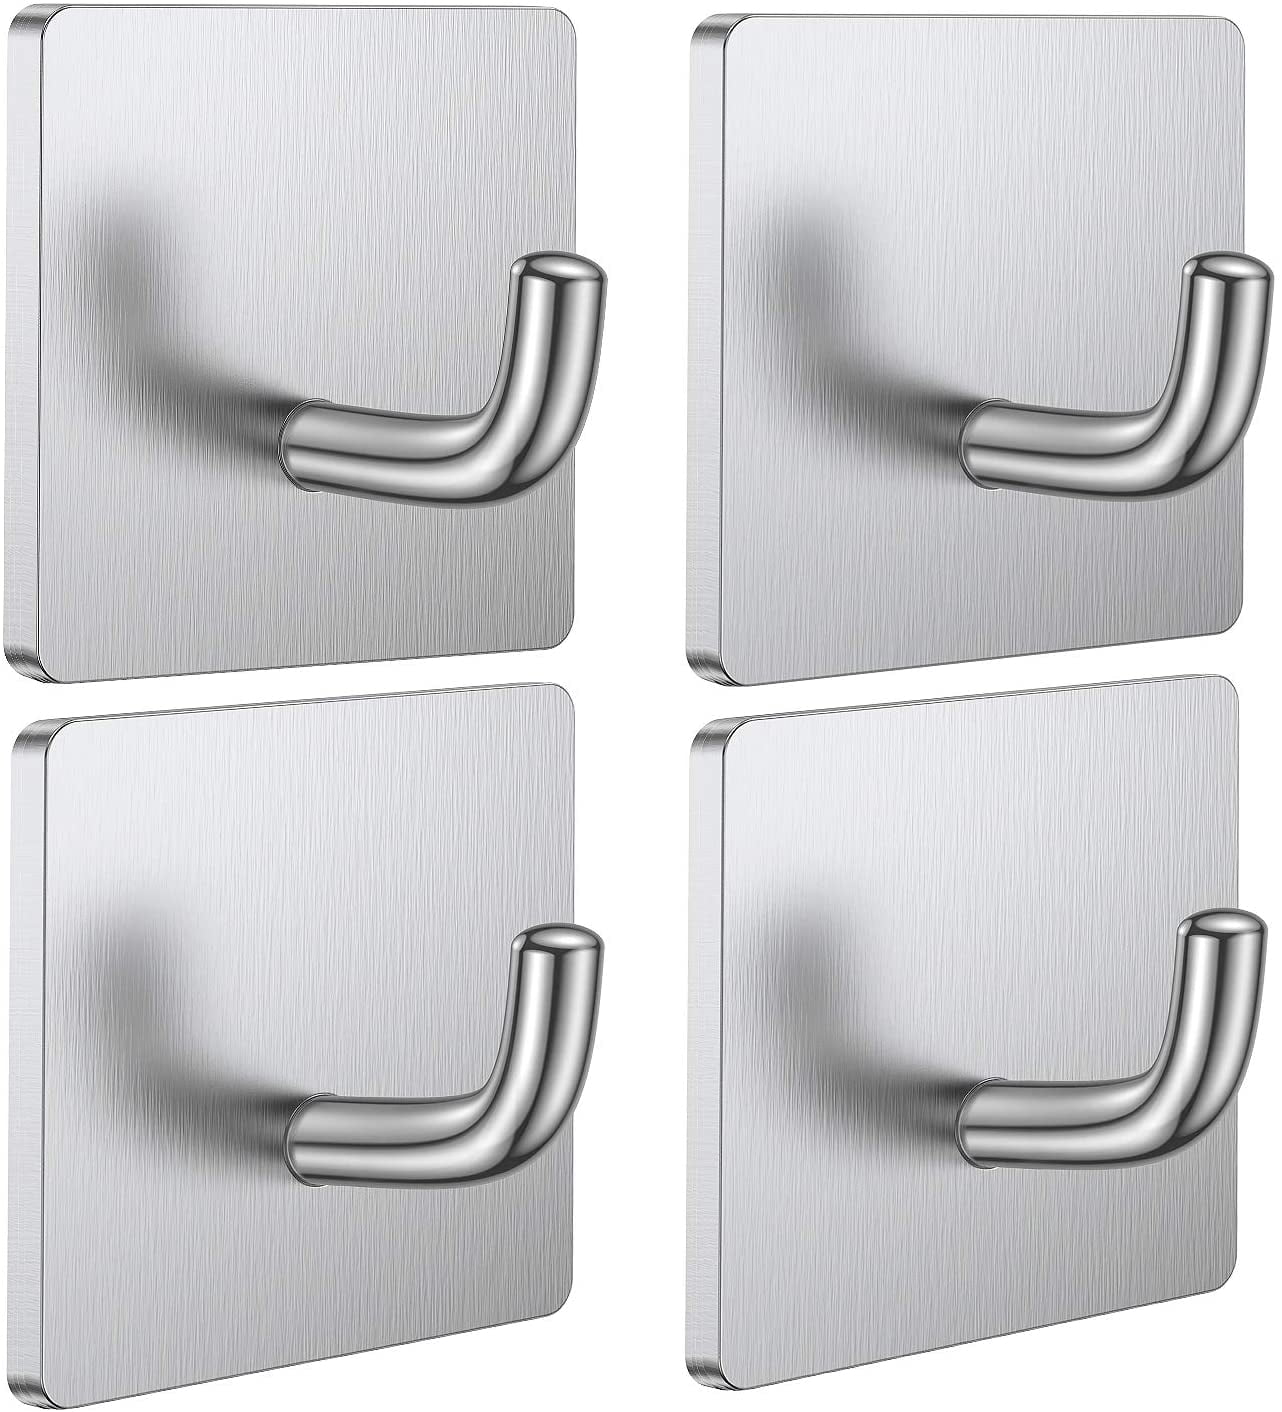 Kitchen etc（Silver） Towel Keys Bags Coat Adhesive Hooks 12 Pack Ultra Strong Waterproof Hanger Duty Command Sticky Hooks Removable Waterproof Reusable Suitable for Robe Home 